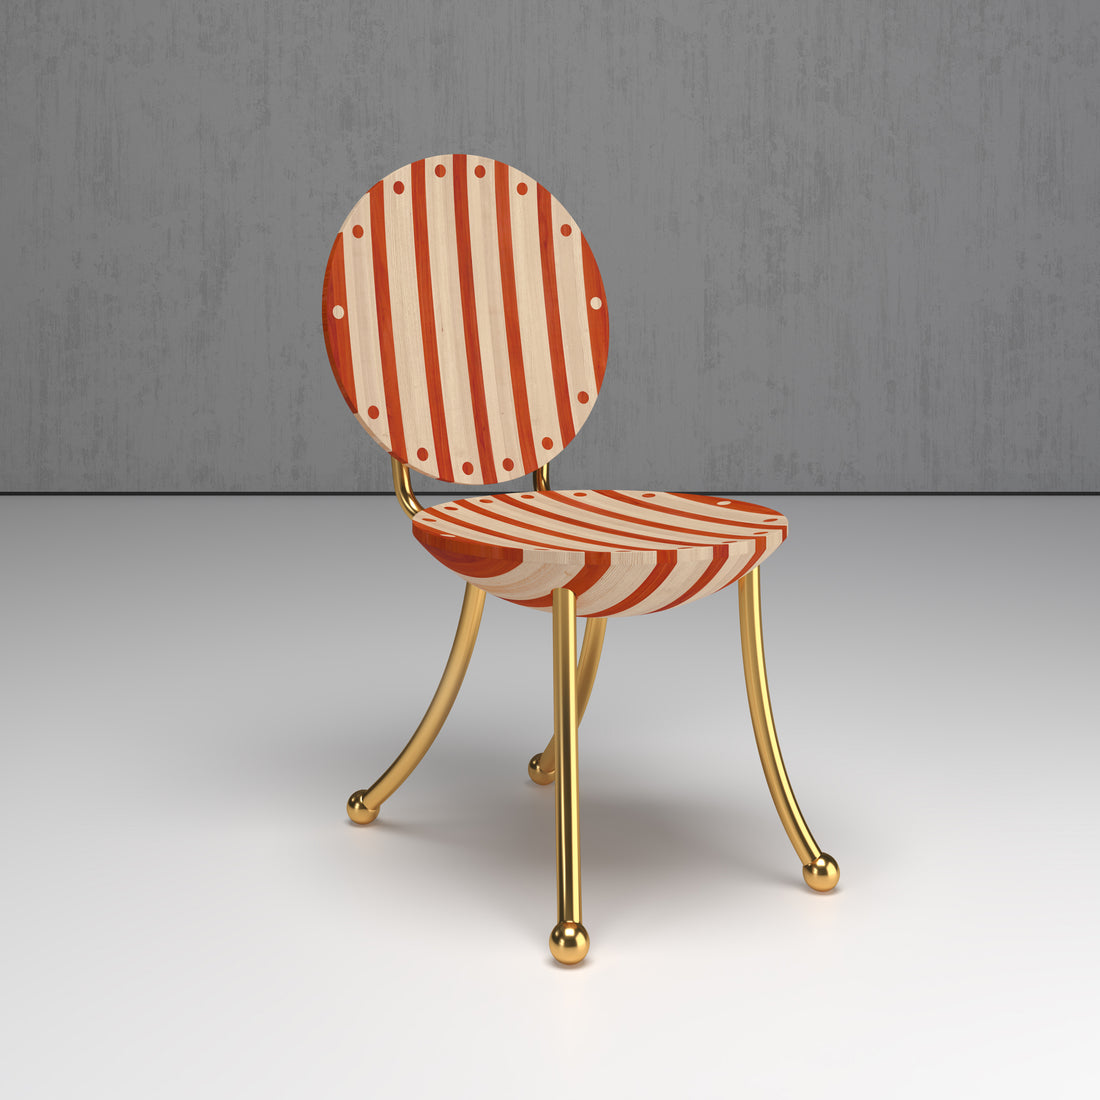 Striped Dining Chair Armless